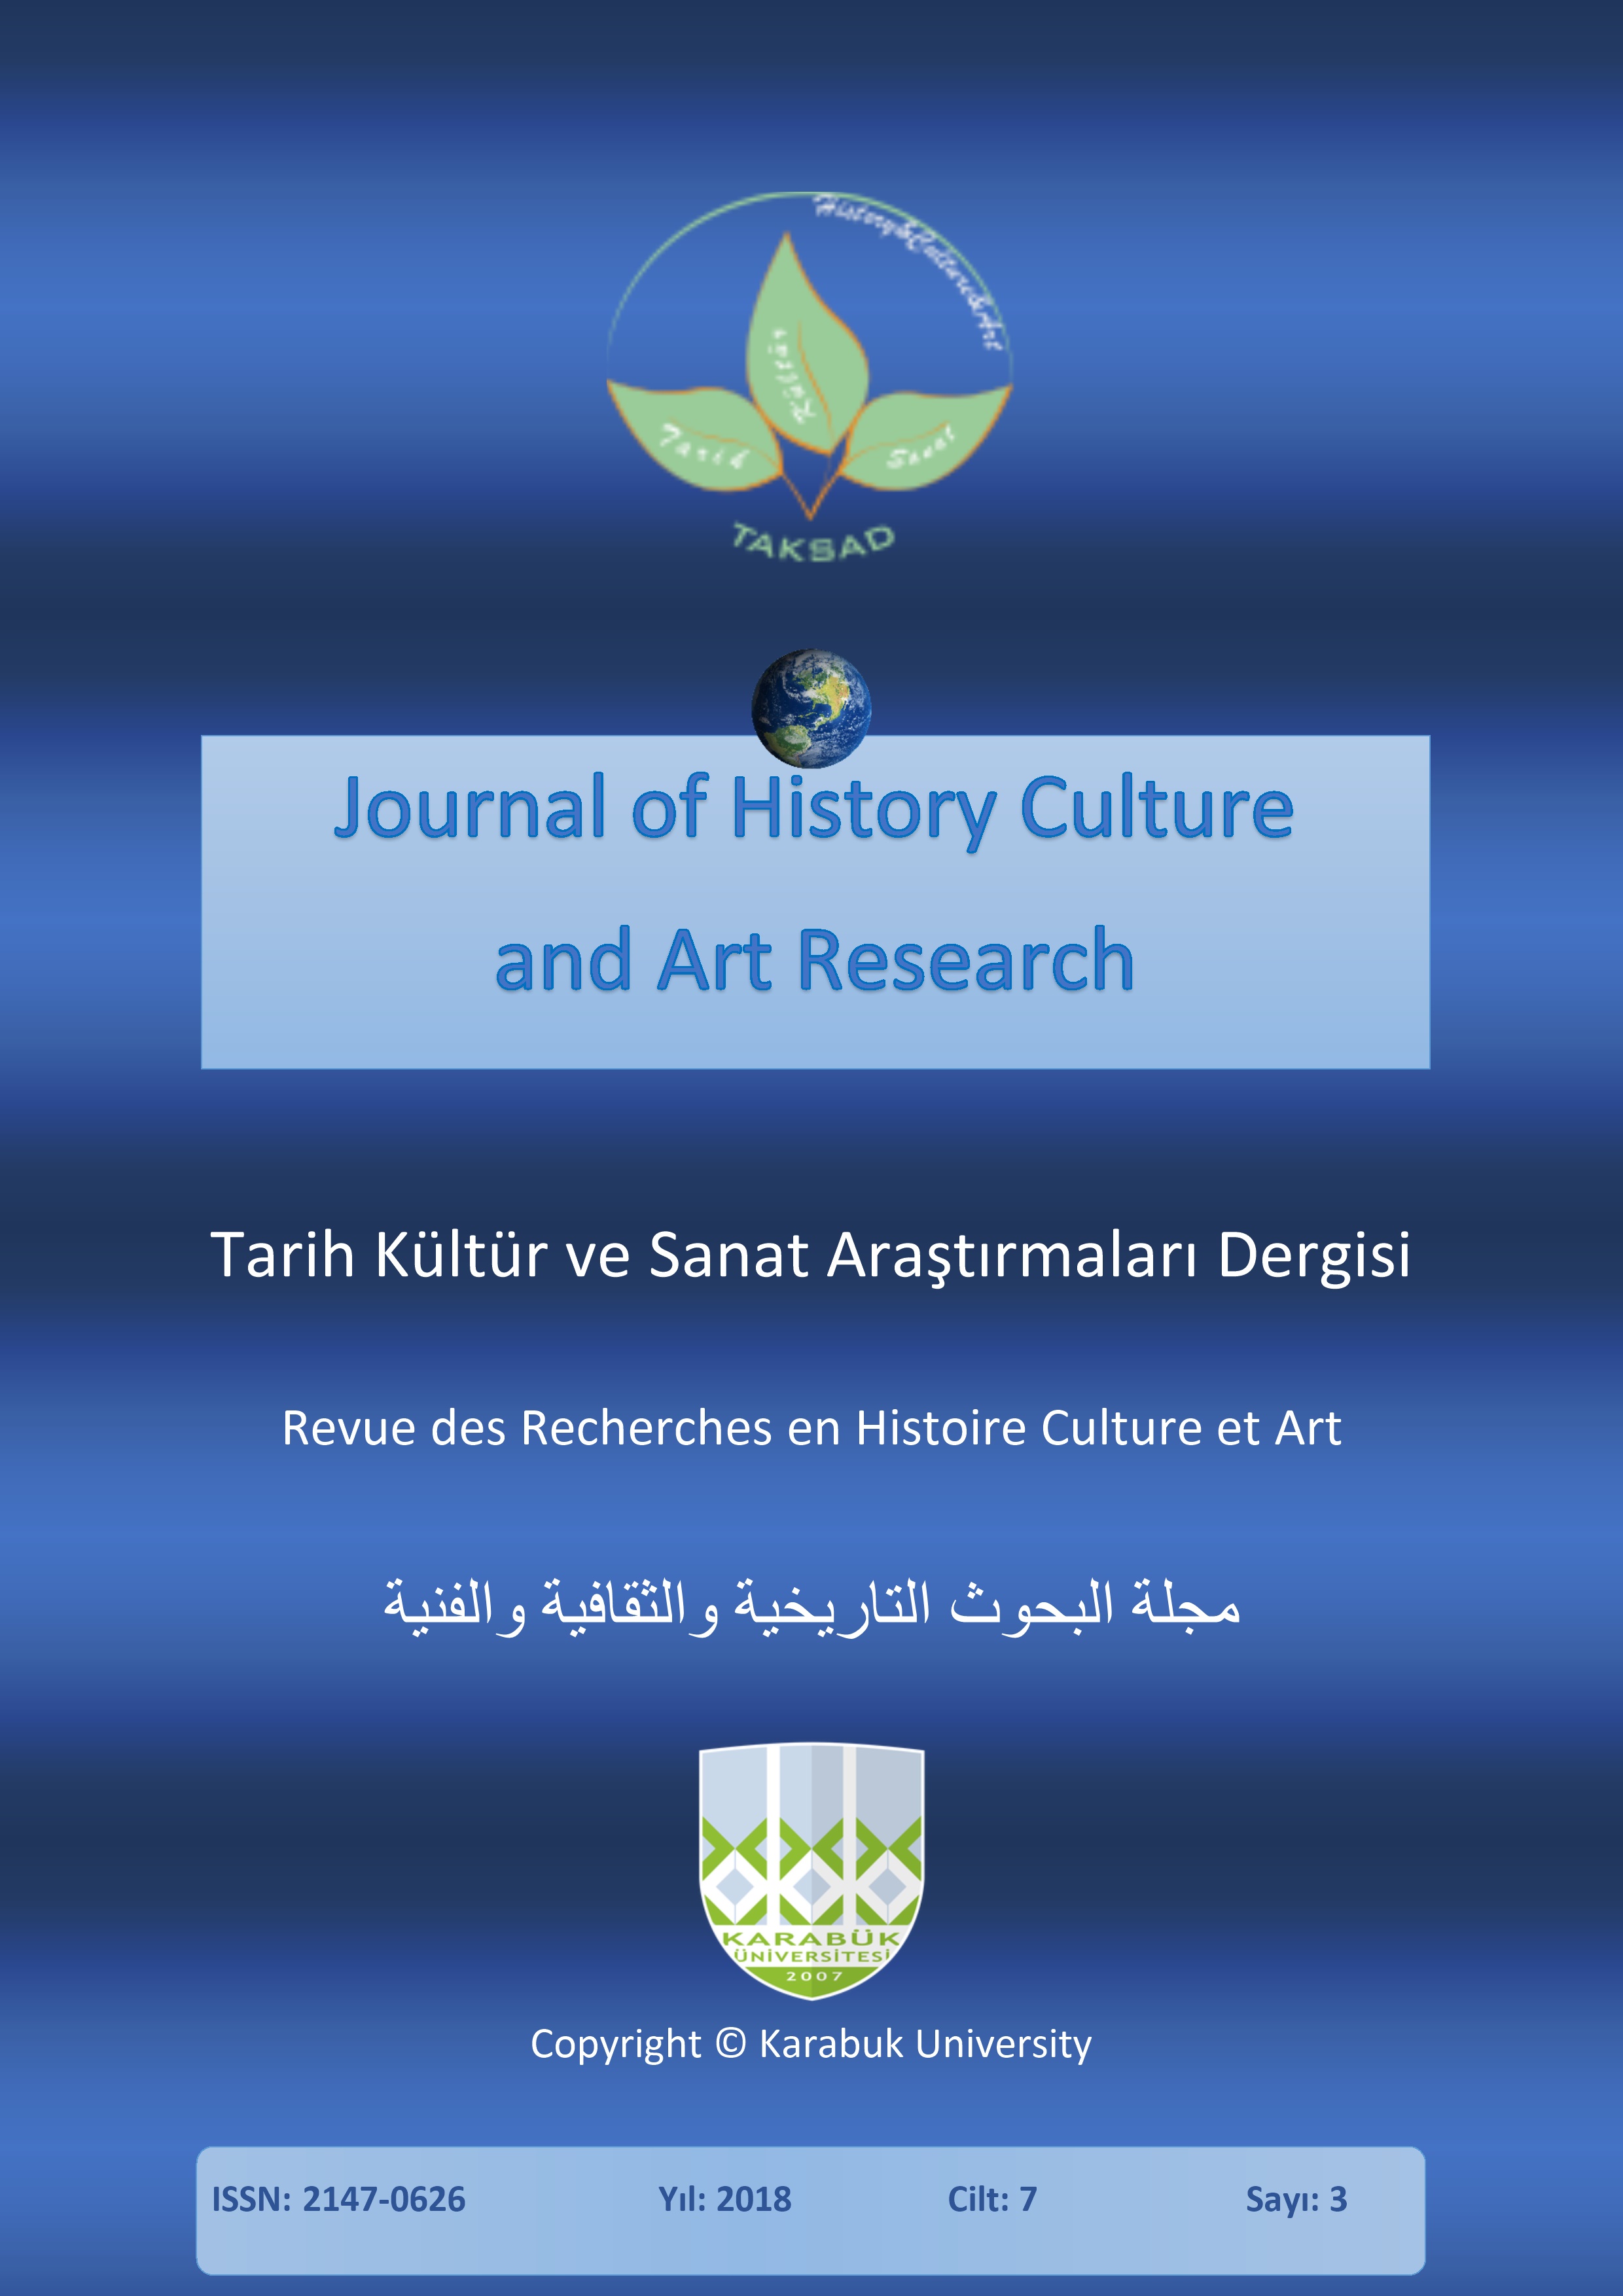 					View Vol. 7 No. 3 (2018): Journal of History Culture and Art Research7(3)
				